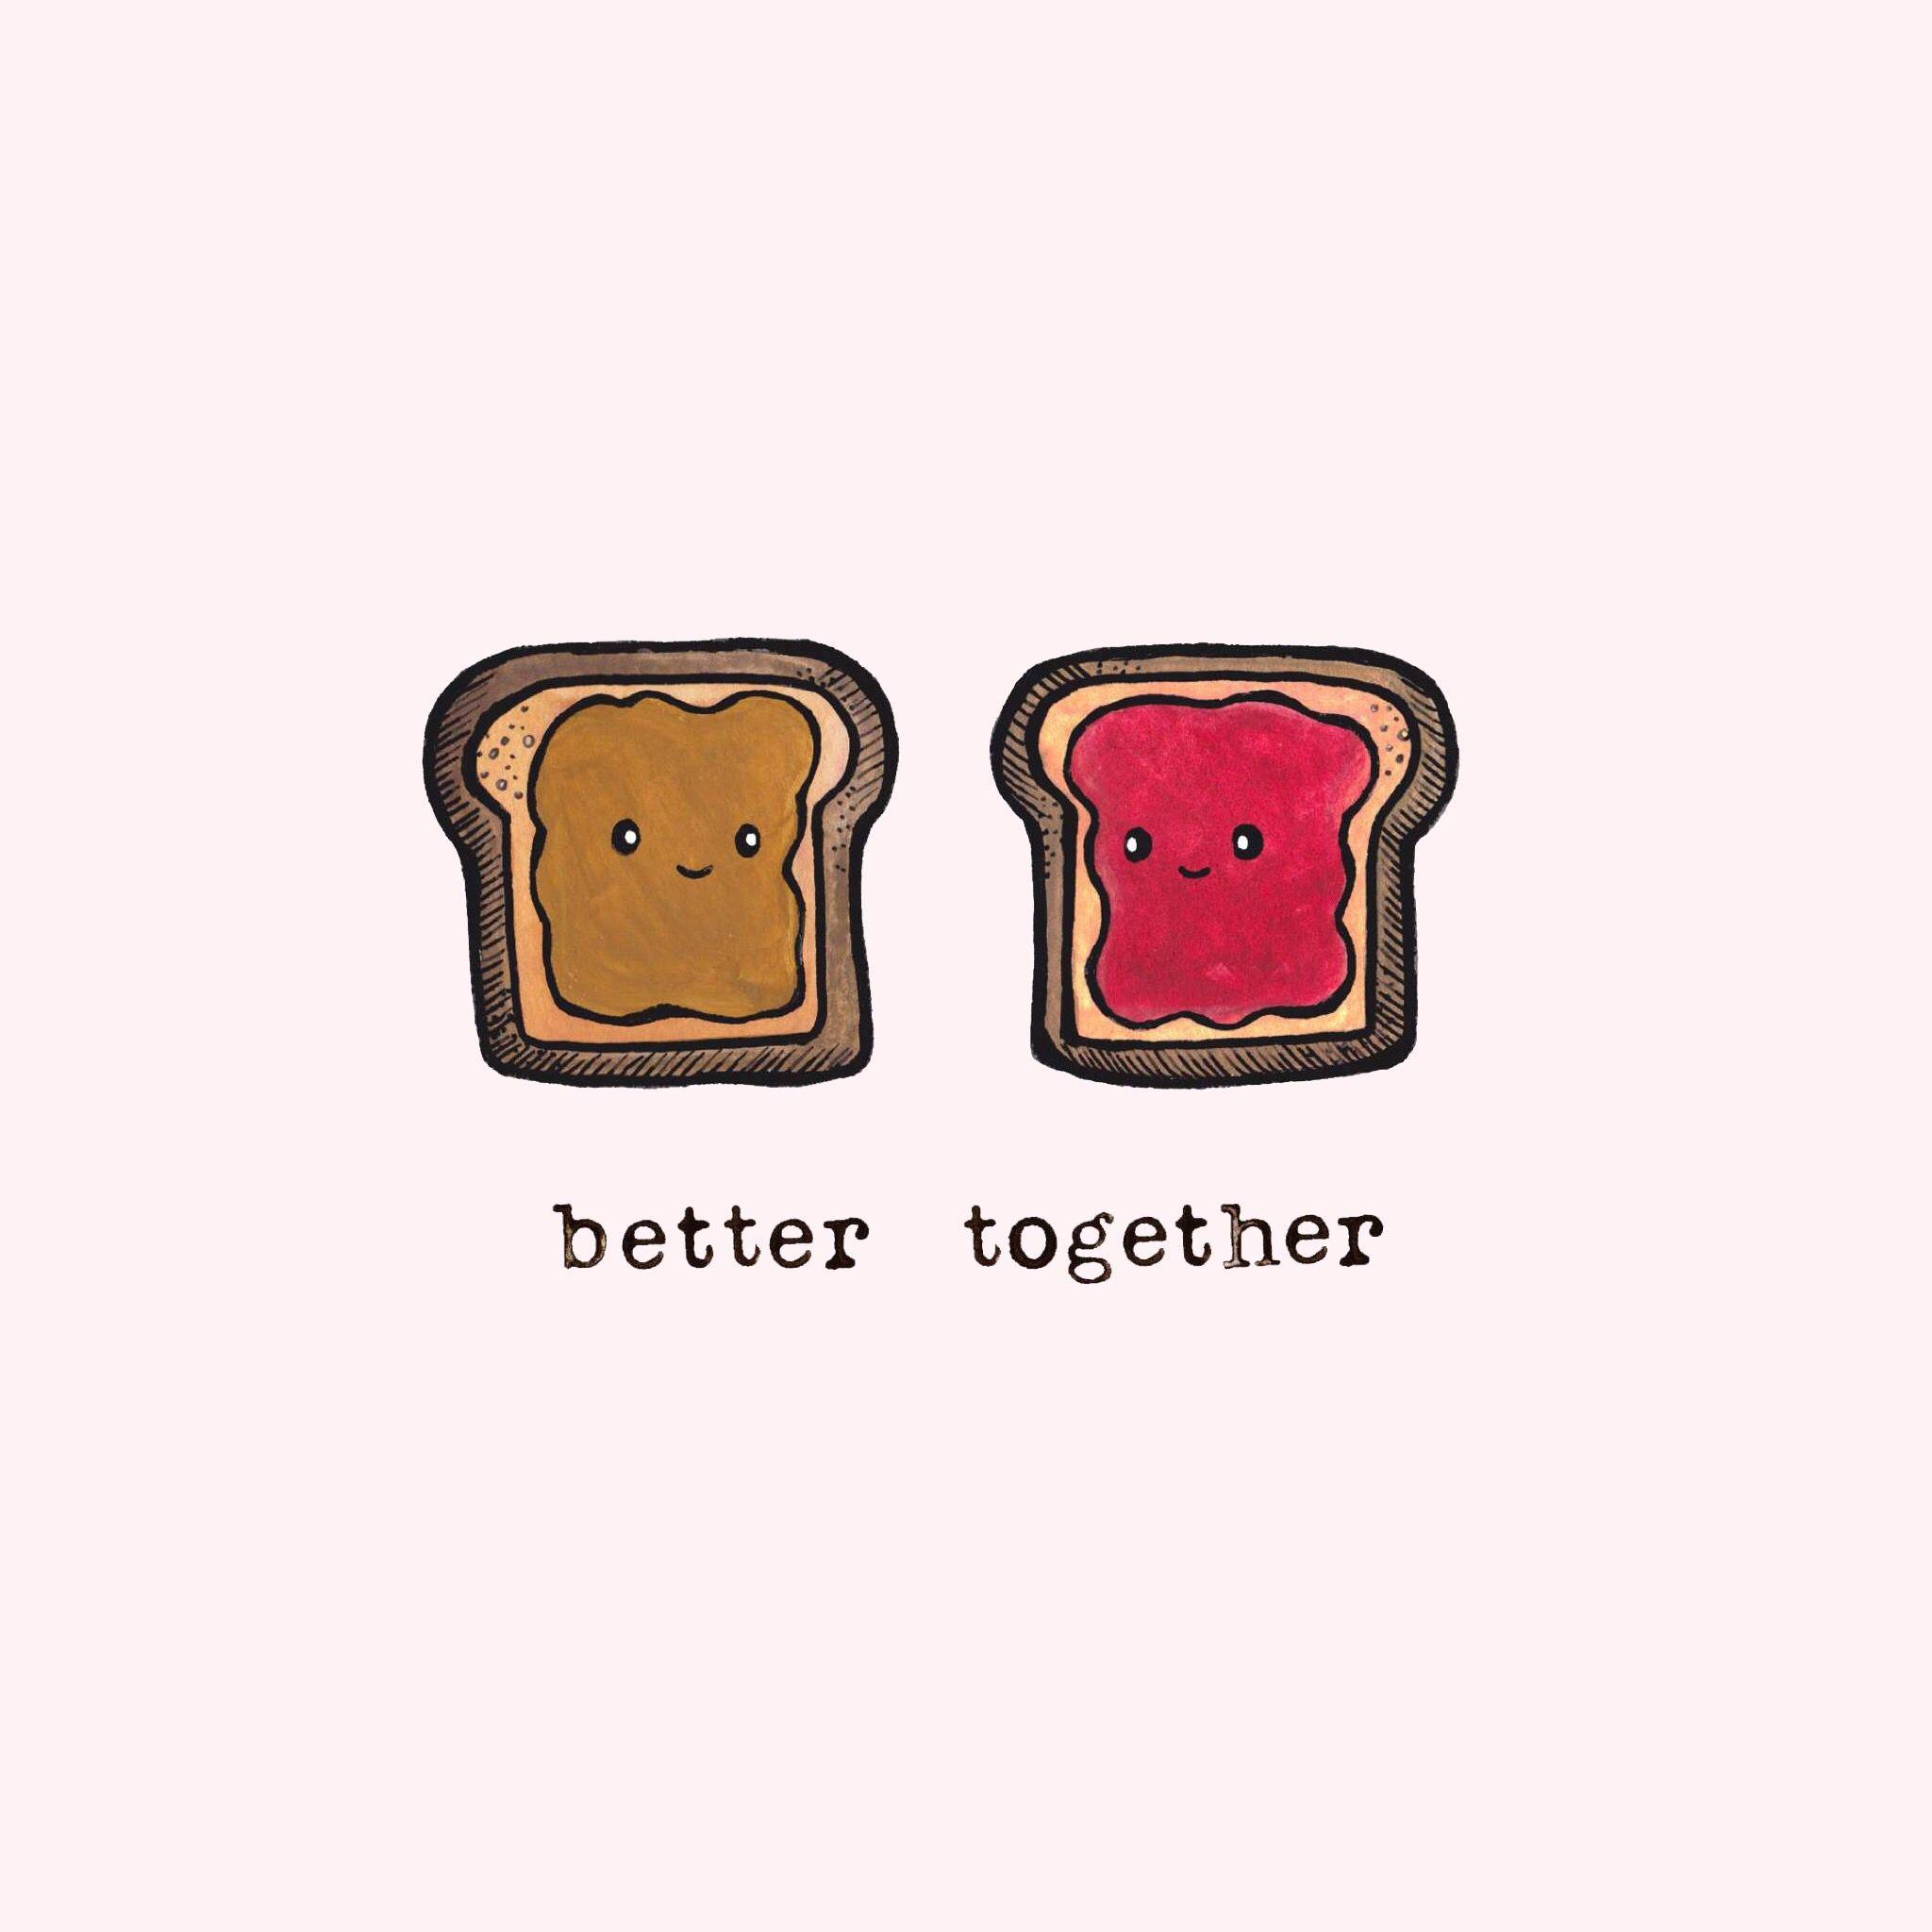 better together butter + jelly. Work. Cute